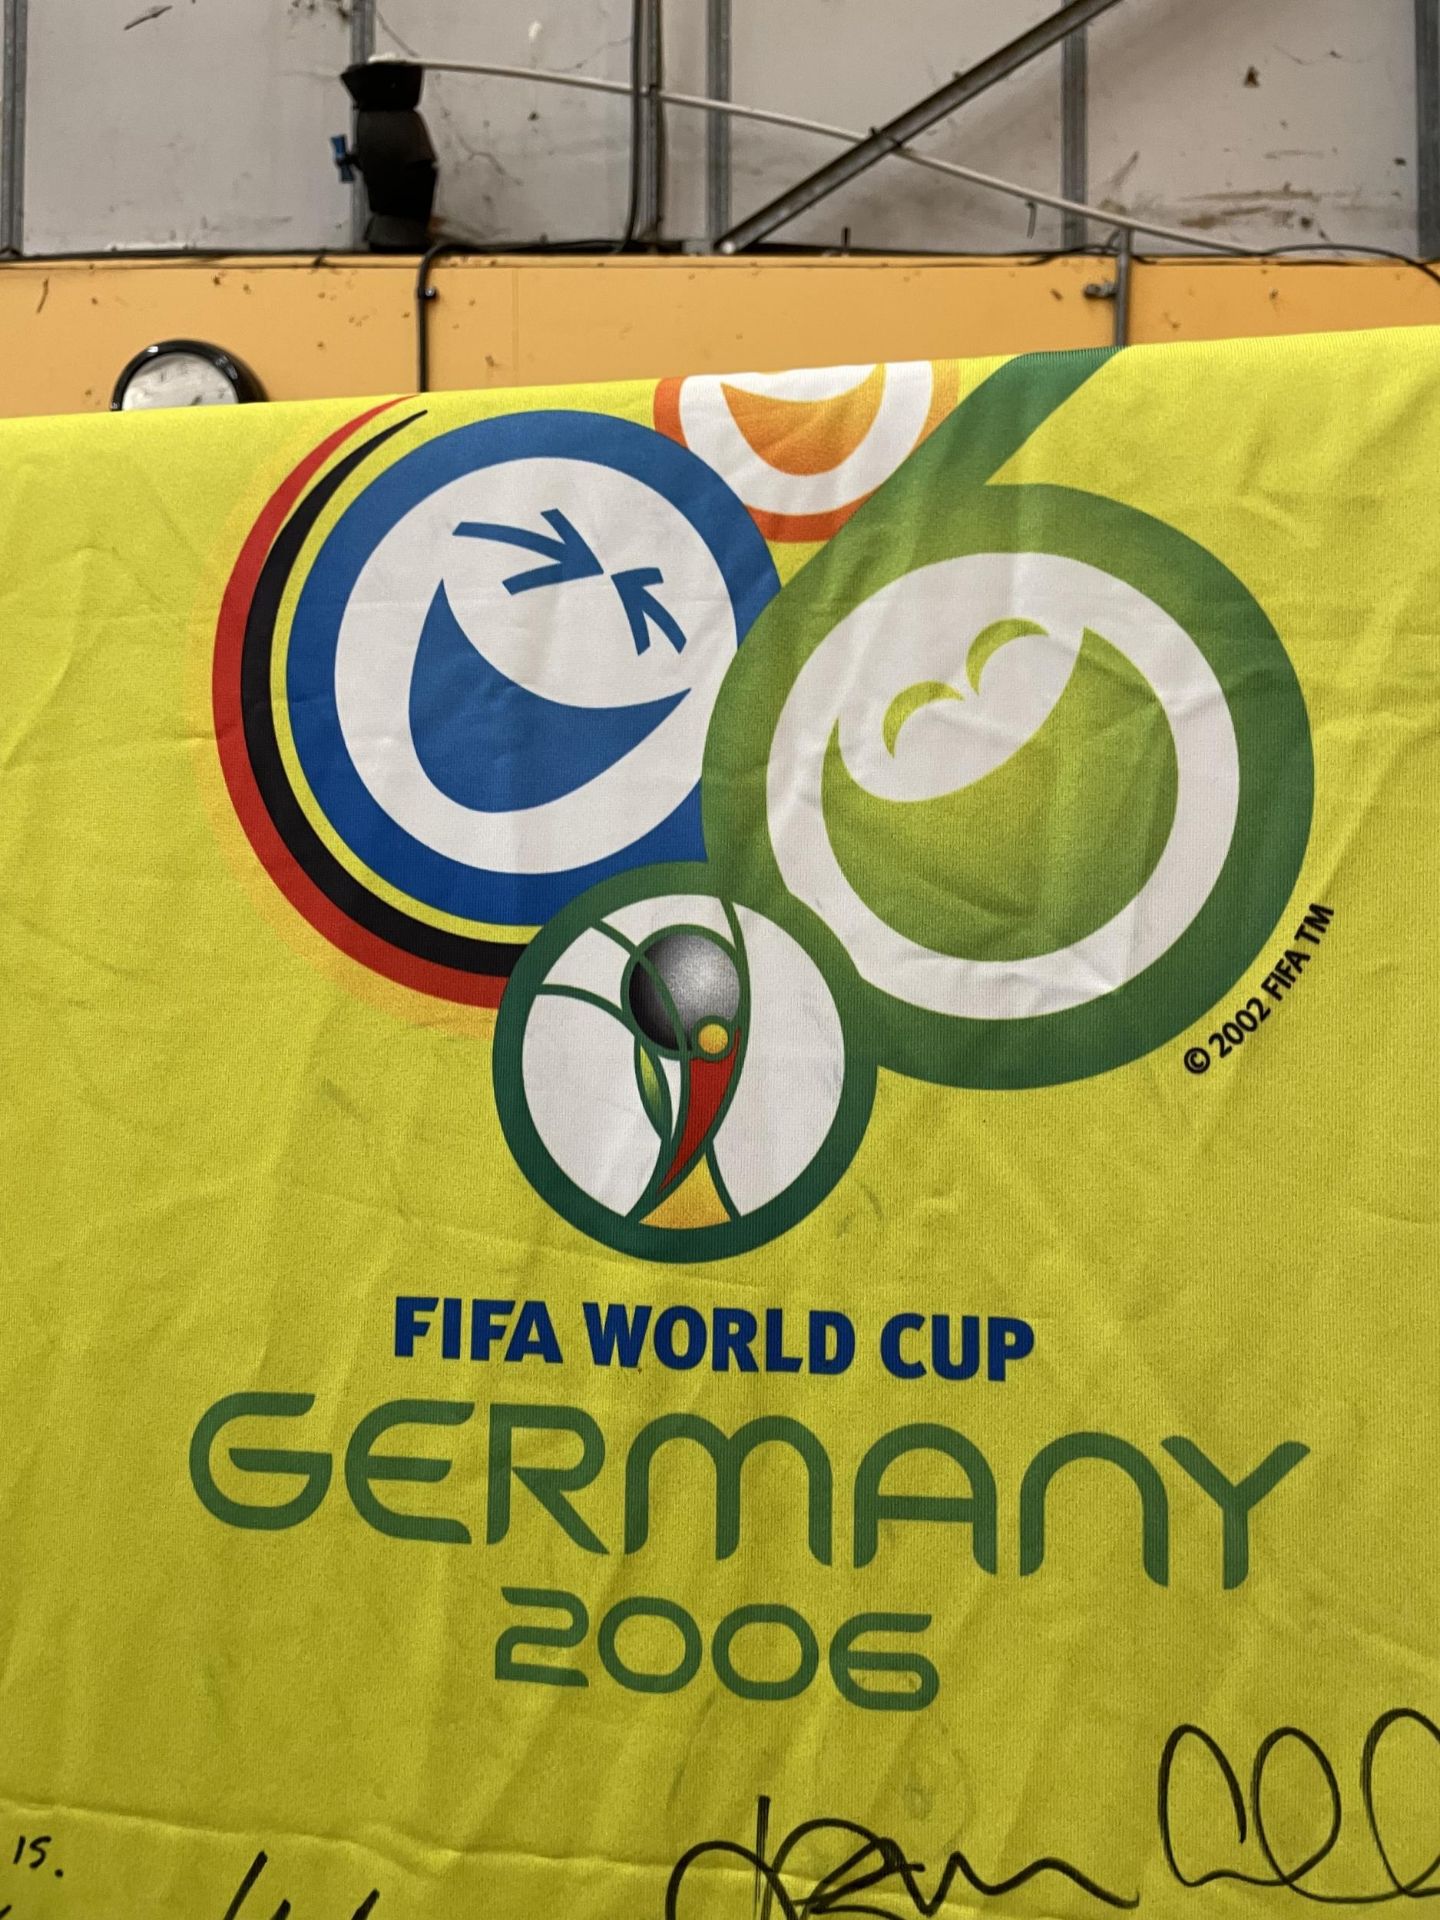 A FIFA WORLD CUP 2006 GERMANY SIGNED FLAG - Image 2 of 8